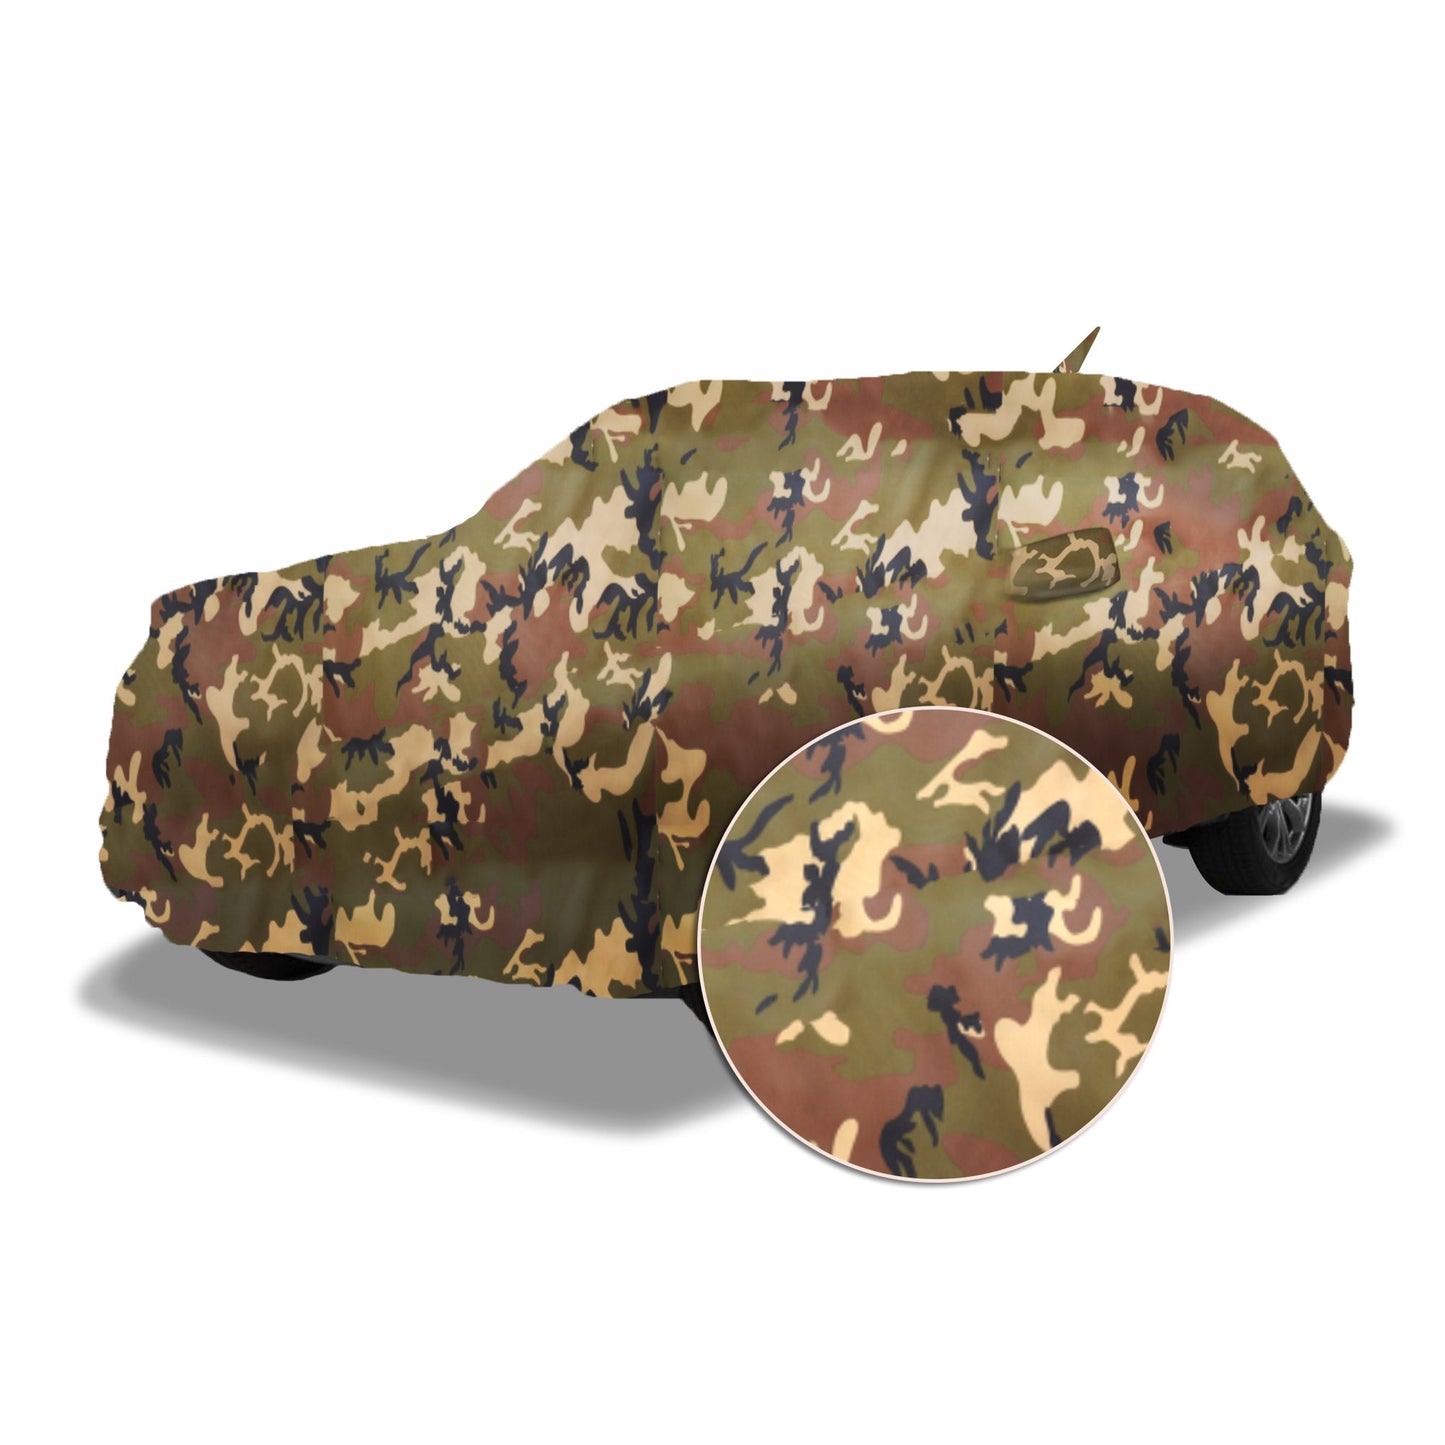 Ascot Mahindra Alturas G4 Car Body Cover Extra Strong & Dust Proof Jungle Military Car Cover with UV Proof & Water-Resistant Coating